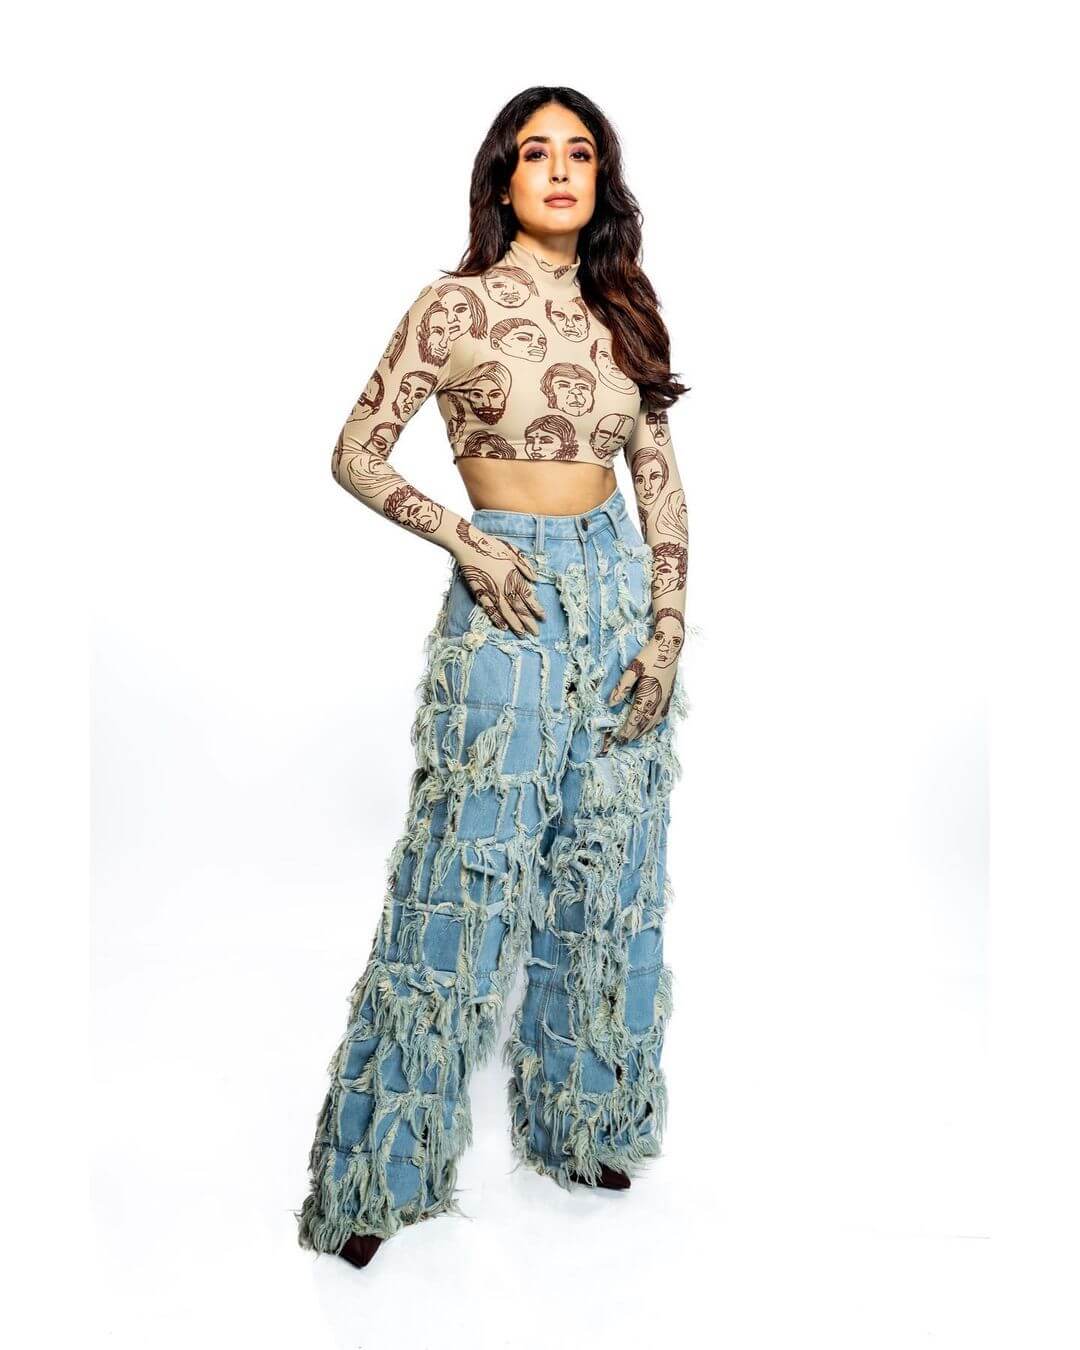 OTT Fame Kritika Quirky Look In Printed Beige Crop Top With Distressed Jeans